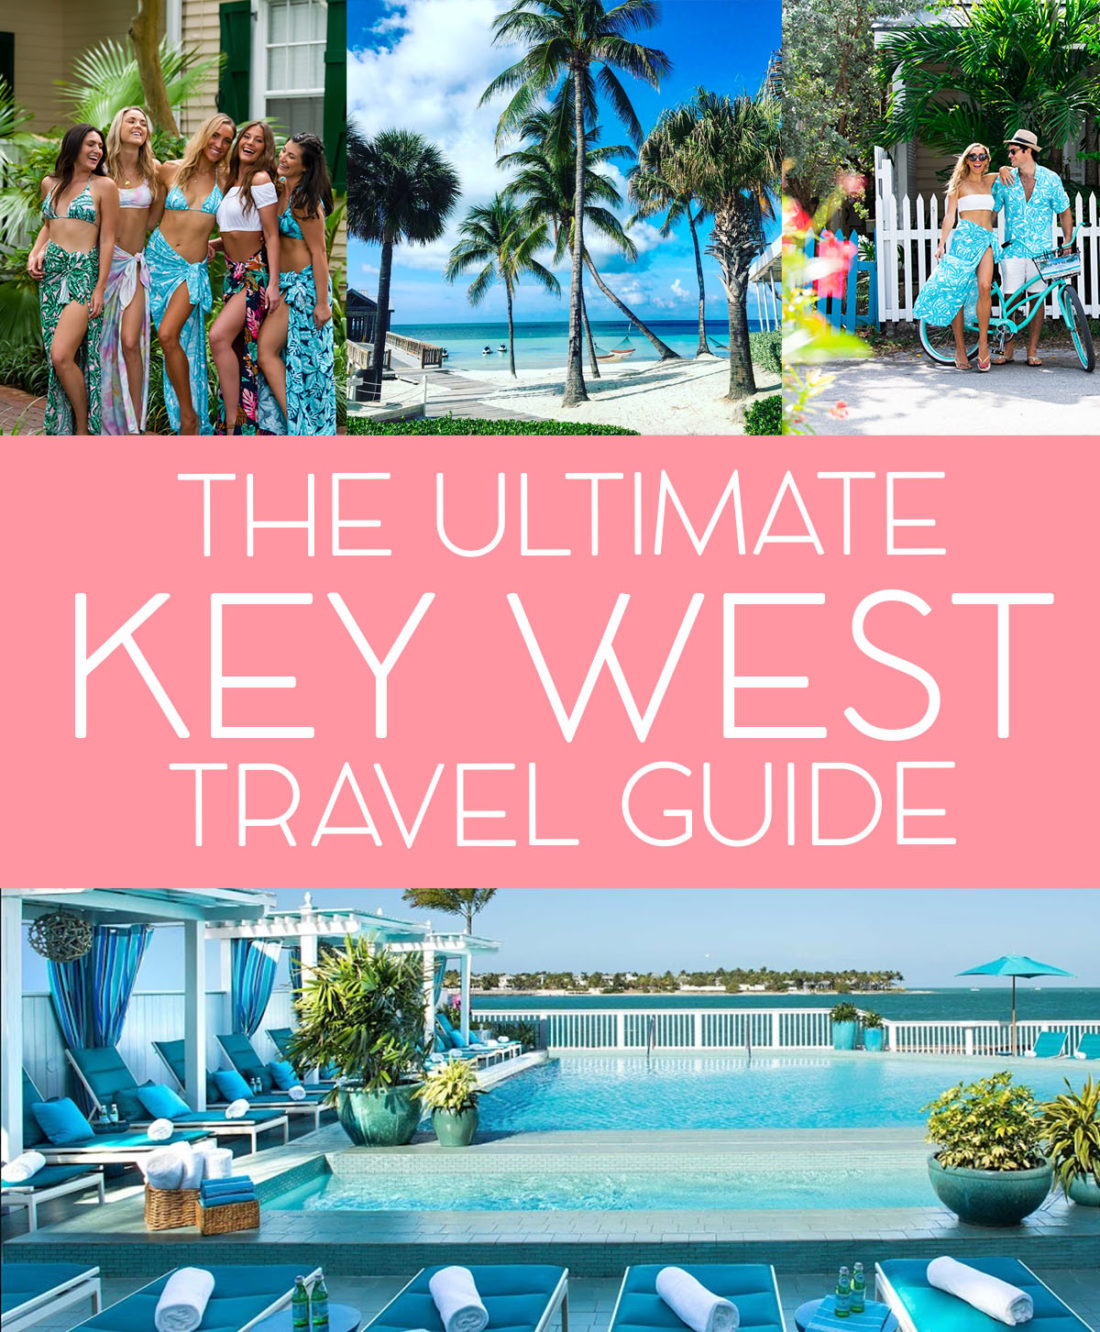 The Ultimate Key West Travel Guide: Where to Eat, Drink, Stay and